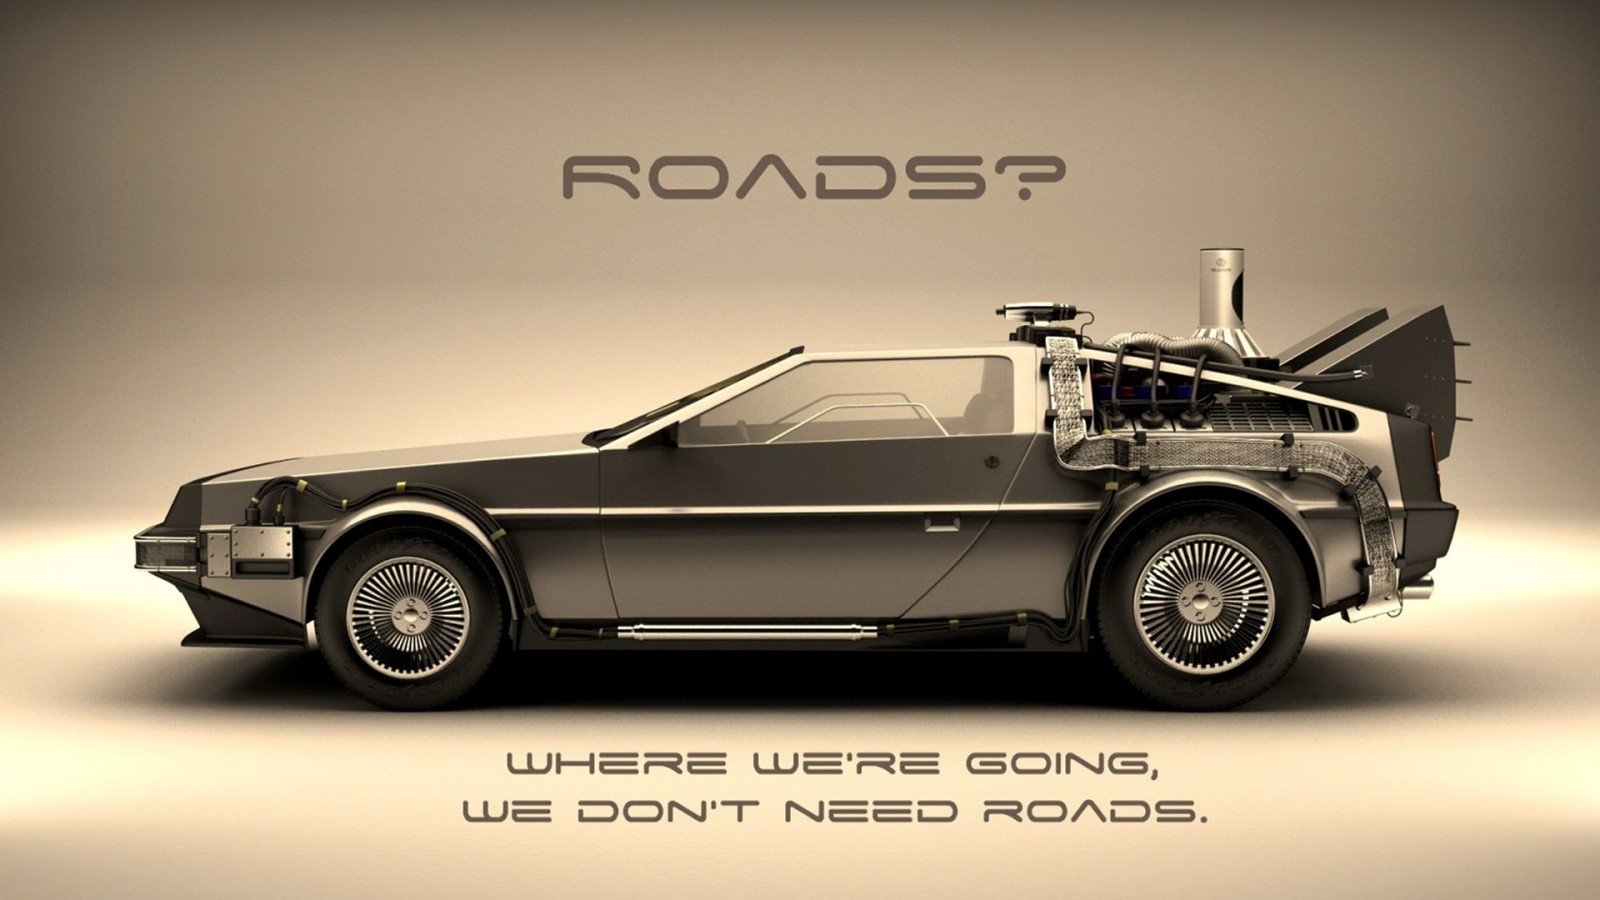 Back to the Future Wallpaper